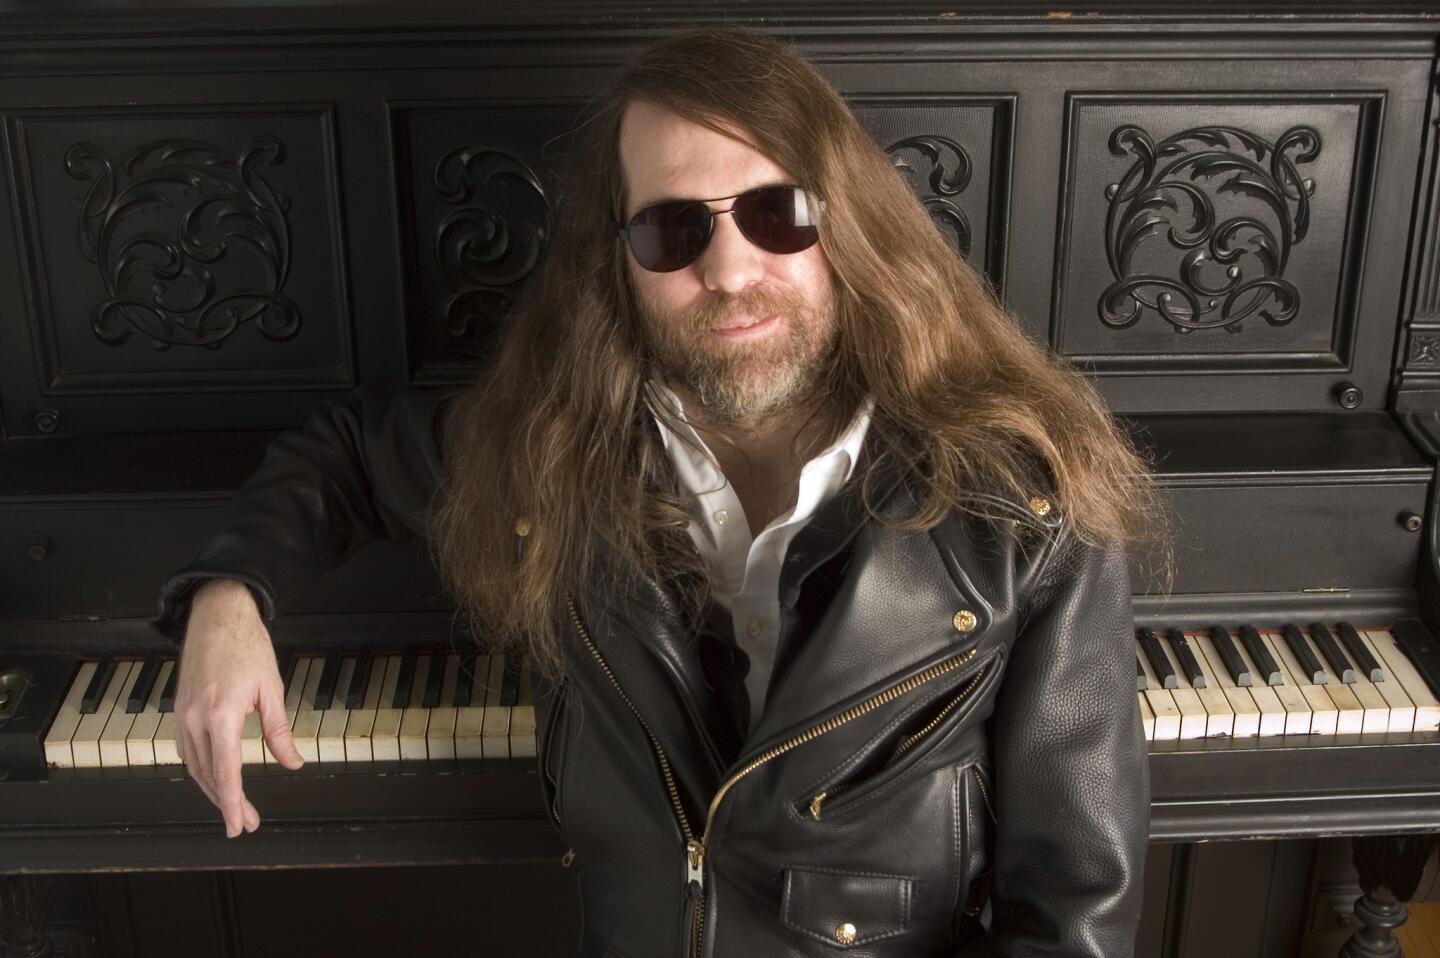 Paul O'Neill, who founded the progressive metal band Trans-Siberian Orchestra, died April 5, 2017. He was 61. Read more.